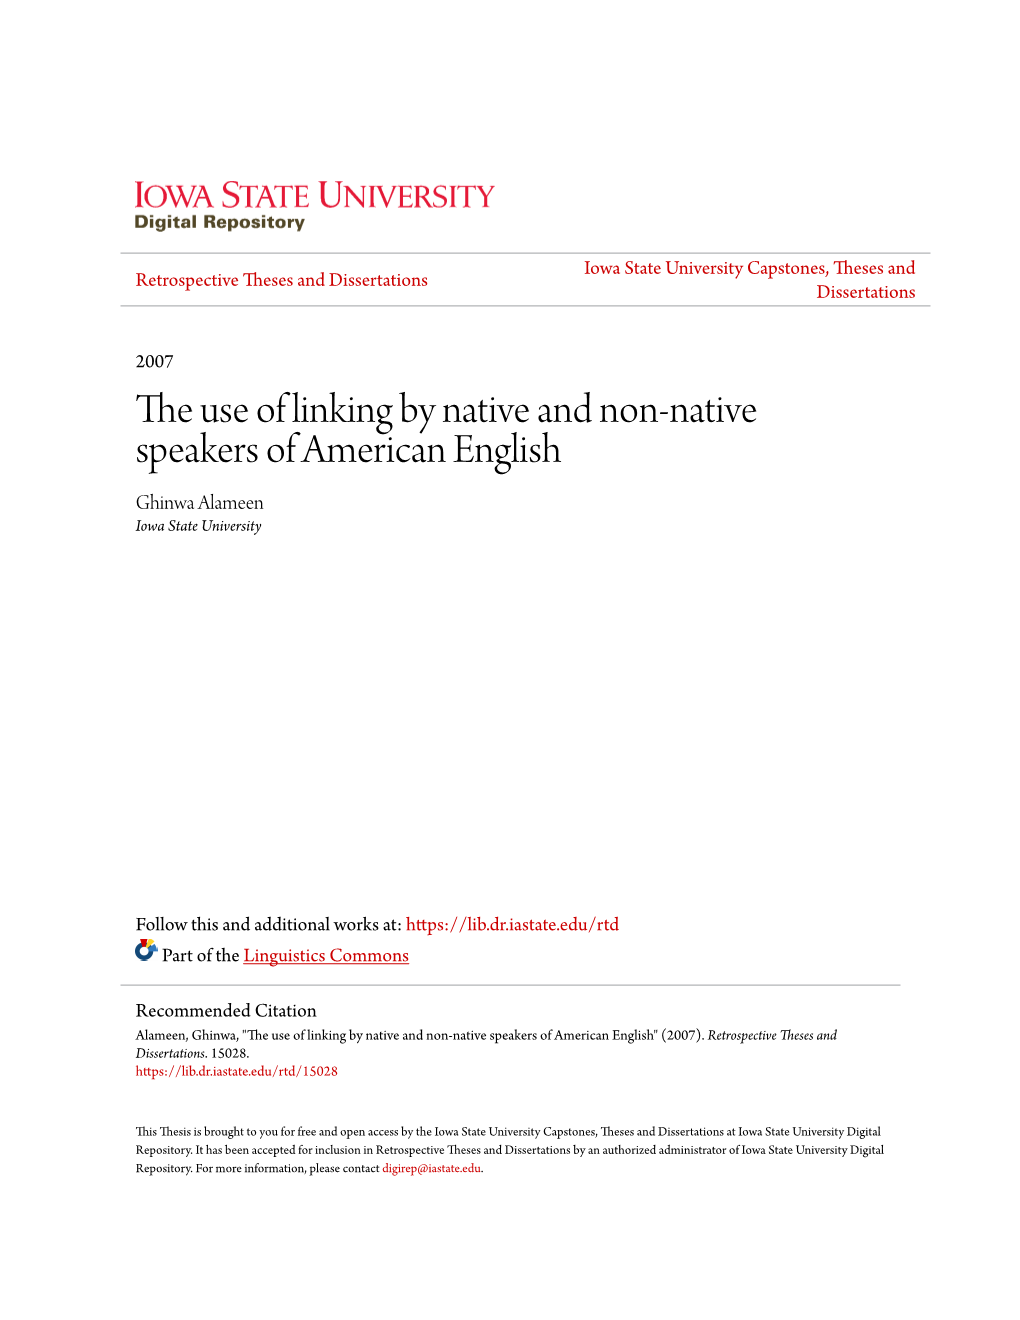 The Use of Linking by Native and Non-Native Speakers of American English" (2007)